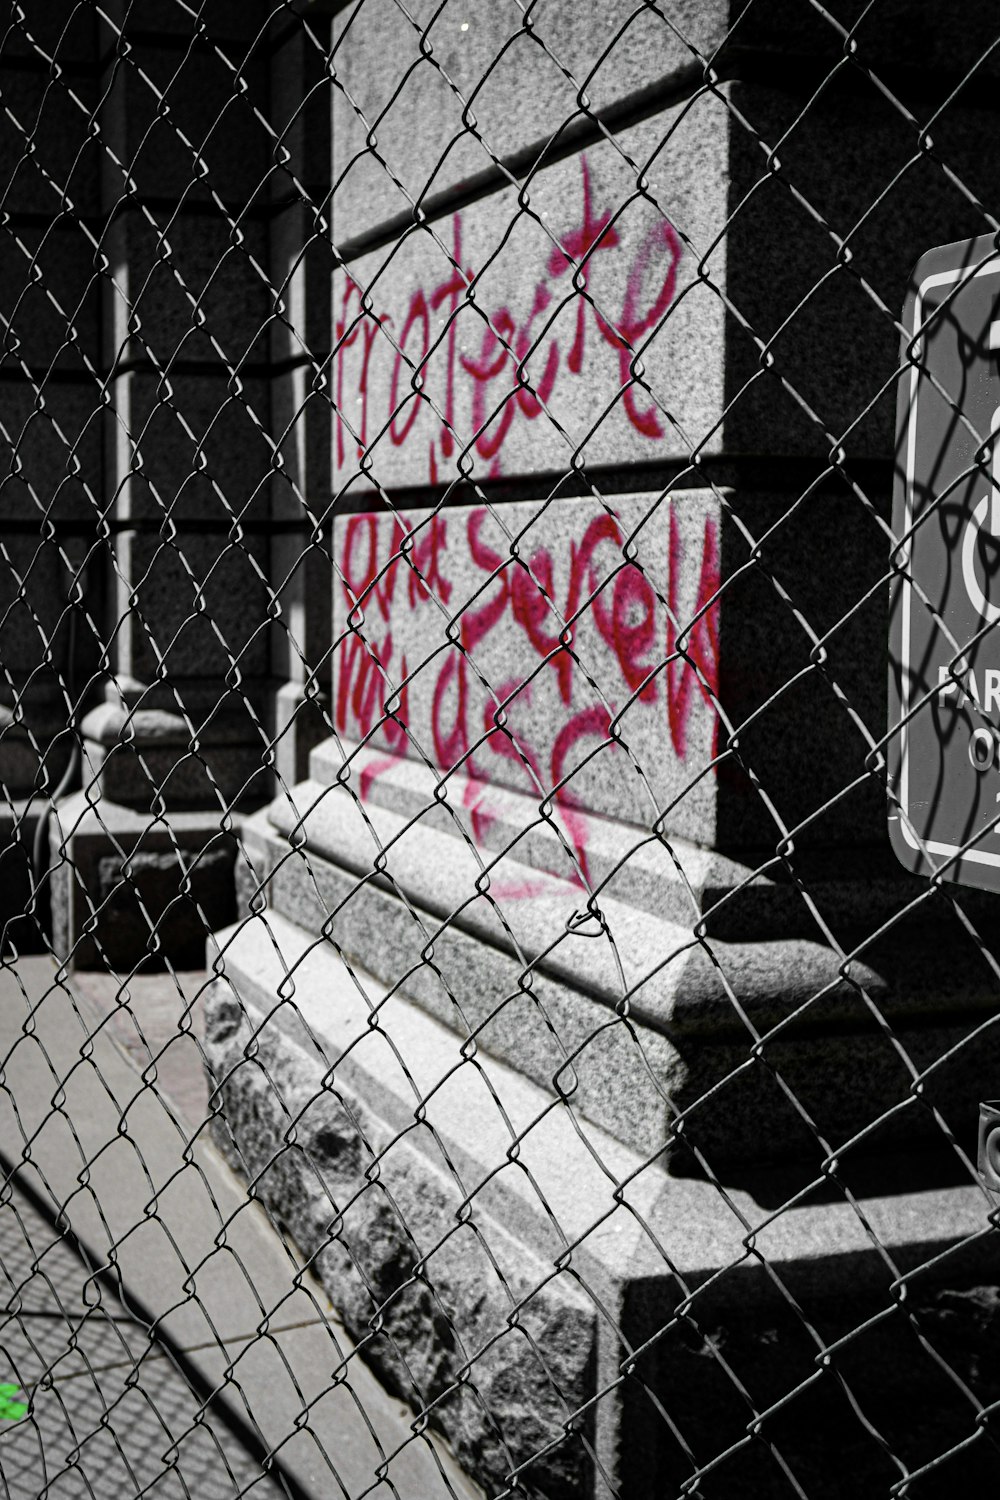 a black and white photo of graffiti on a fence